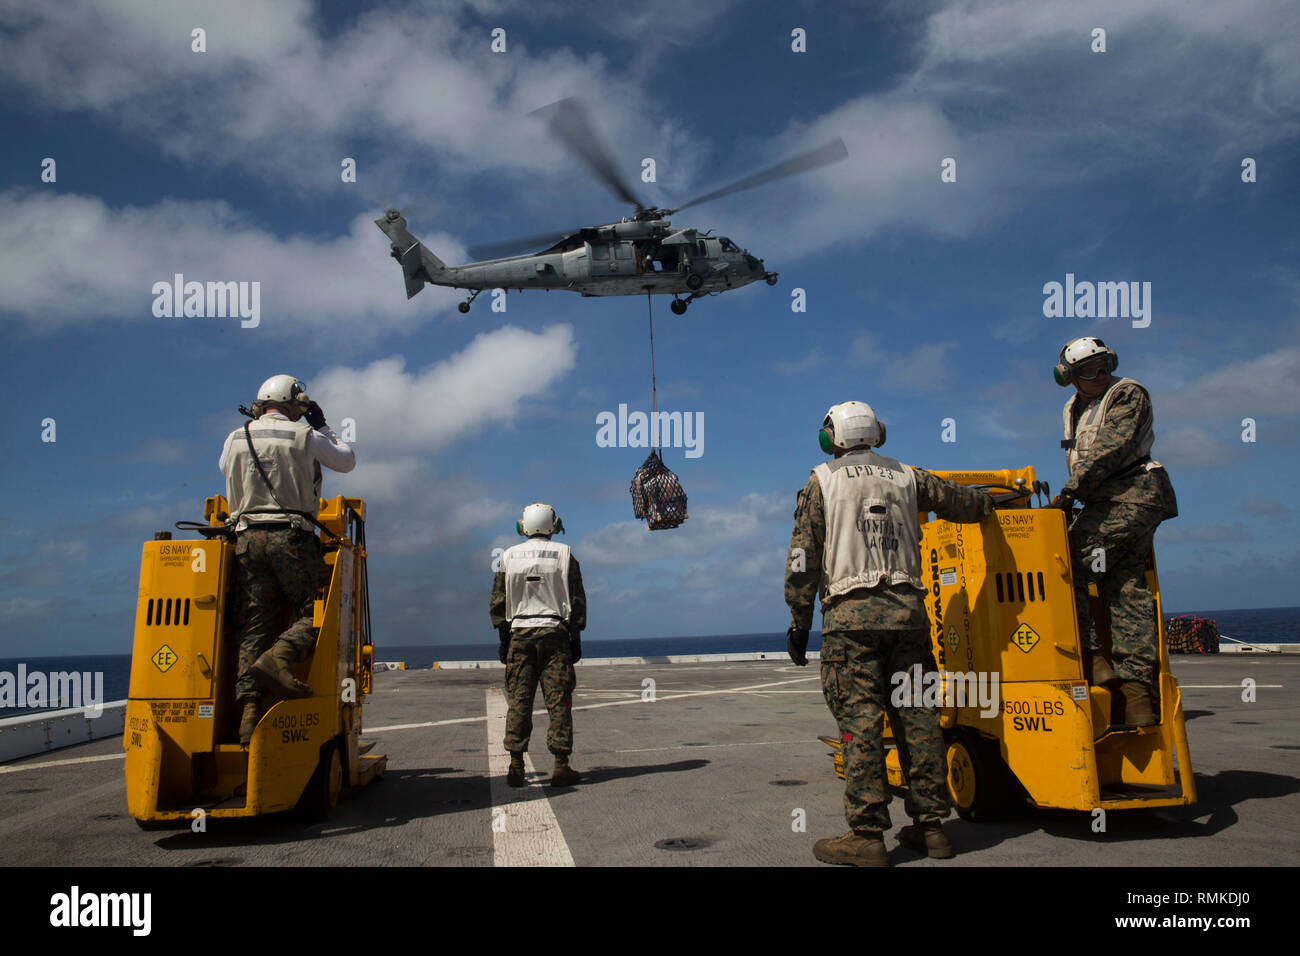 WESTERN PACIFIC (Feb. 7, 2019) U.S. Marines with the 13th Marine Expeditionary Unit (MEU), wait for an SH-60 Sea Hawk to land pallets during an aerial replenishment-at-sea aboard the San Antonio-class amphibious transport dock USS Anchorage (LPD 23) while on a deployment of the Essex Amphibious Ready Group (ARG) and 13th MEU. The Essex ARG/13th MEU is a capable and lethal Navy-Marine Corps team deployed to the U.S. 7th Fleet area of operations to support regional stability, reassure partners and allies and maintain a presence postured to respond to any crisis ranging from humanitarian assistan Stock Photo